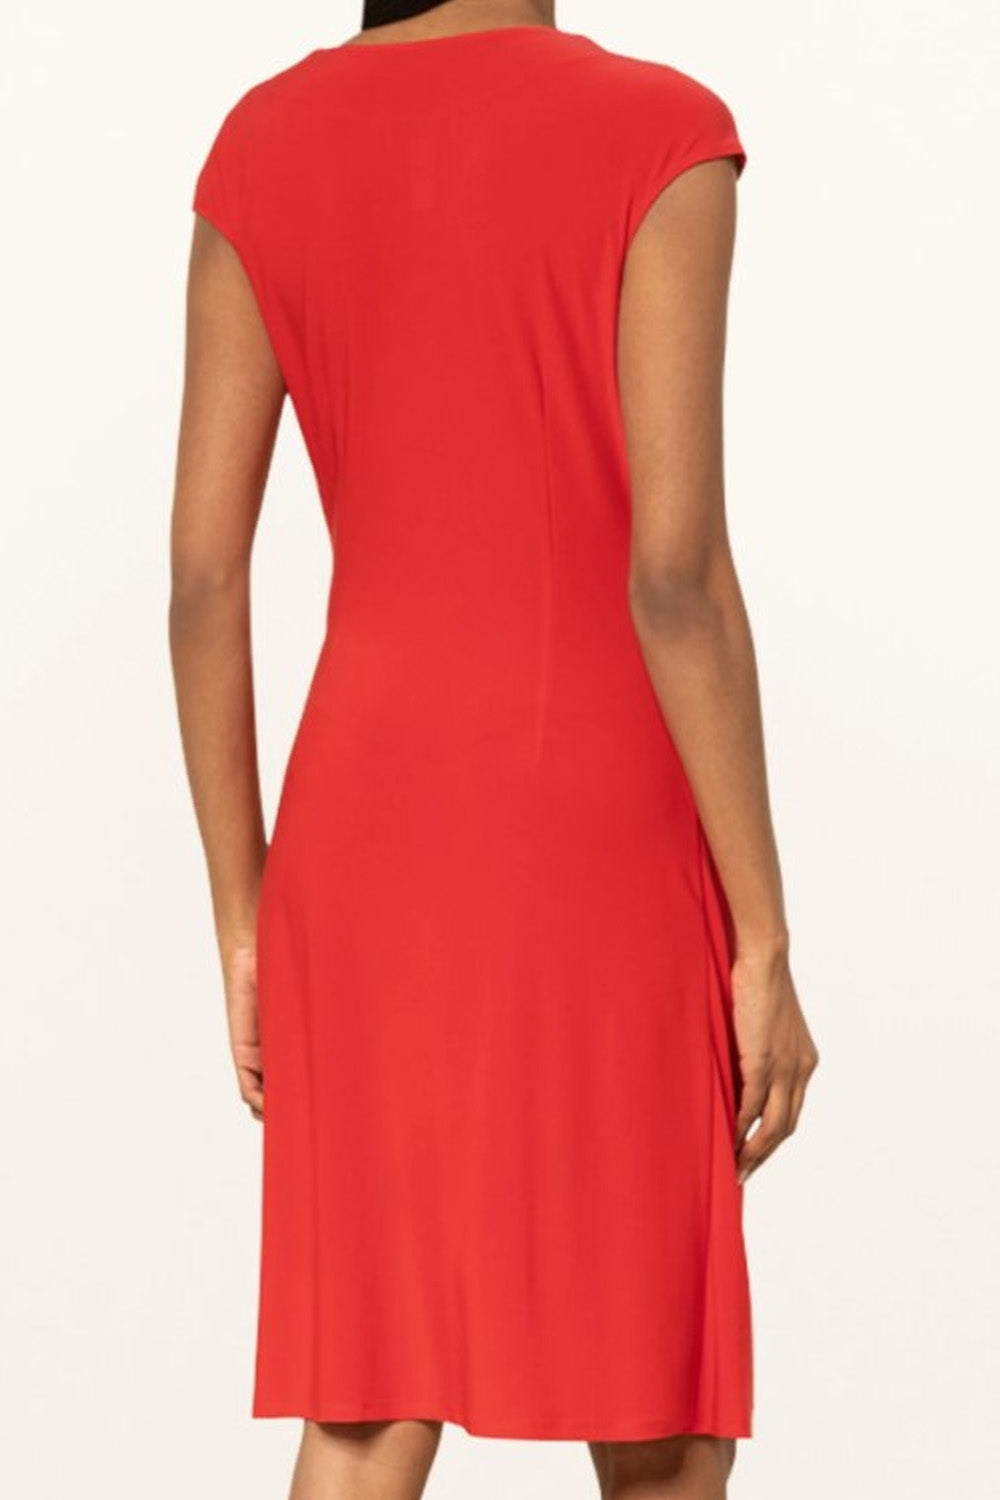 Delights Red Dress